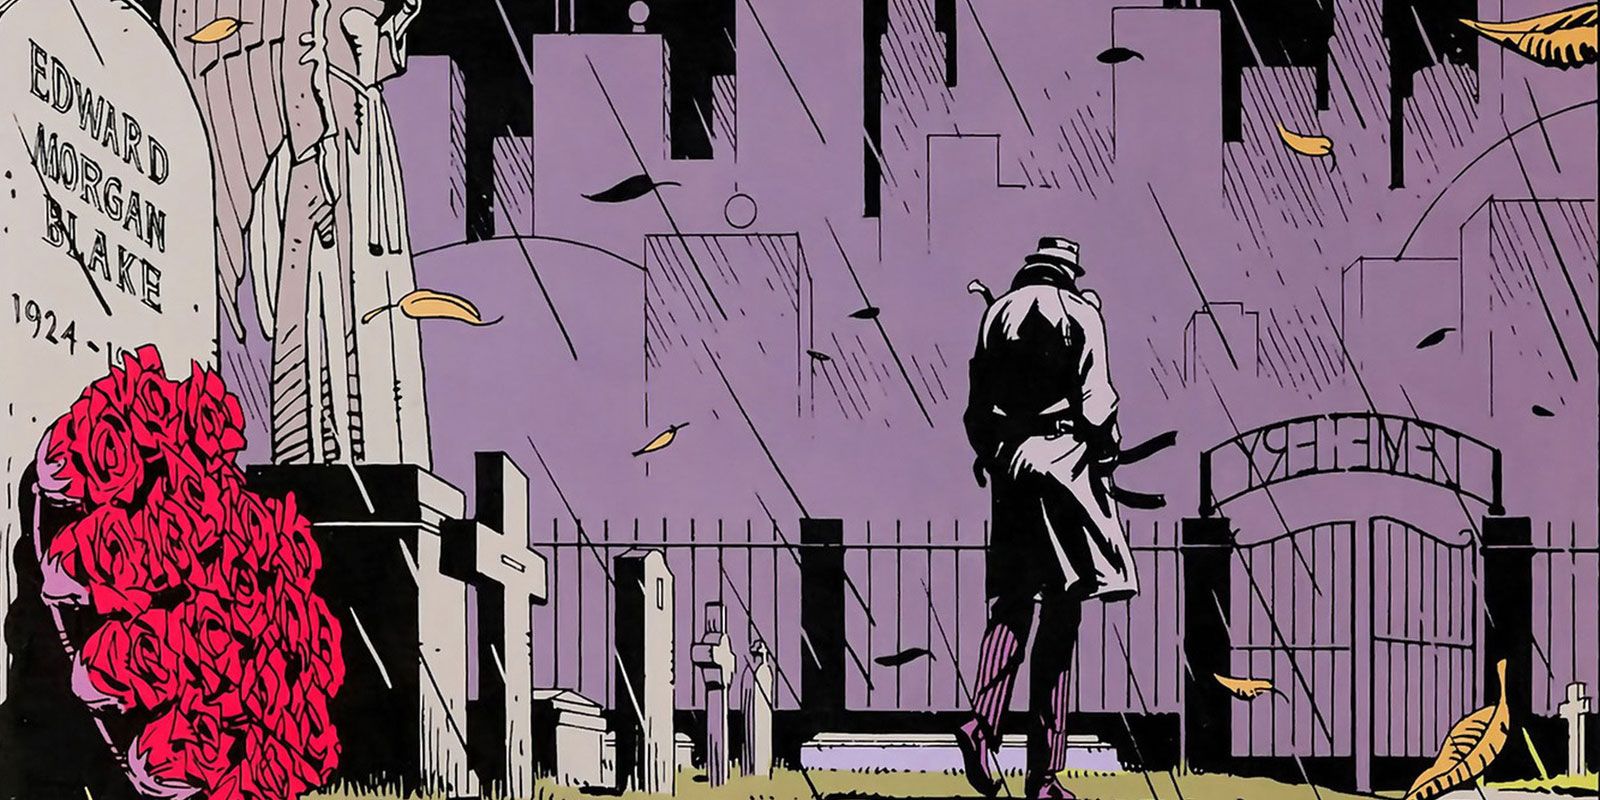 Comic panel from Watchmen, featuring Rorschach.